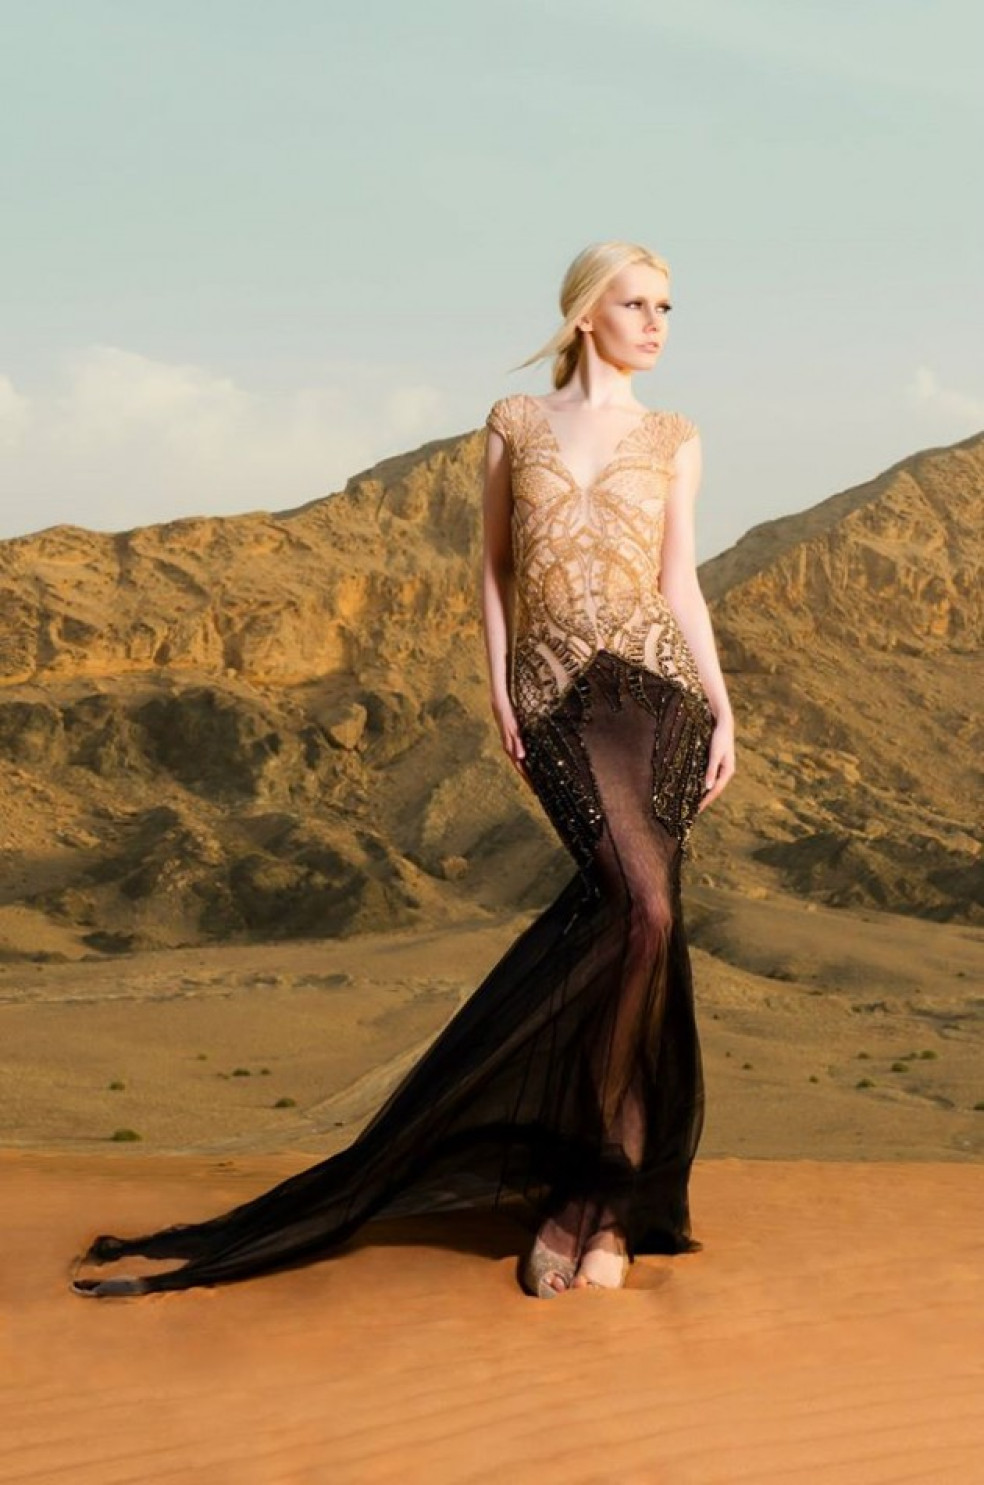 SMOKE AND MIRRORS BY DANY TABET FOR S/S 2015